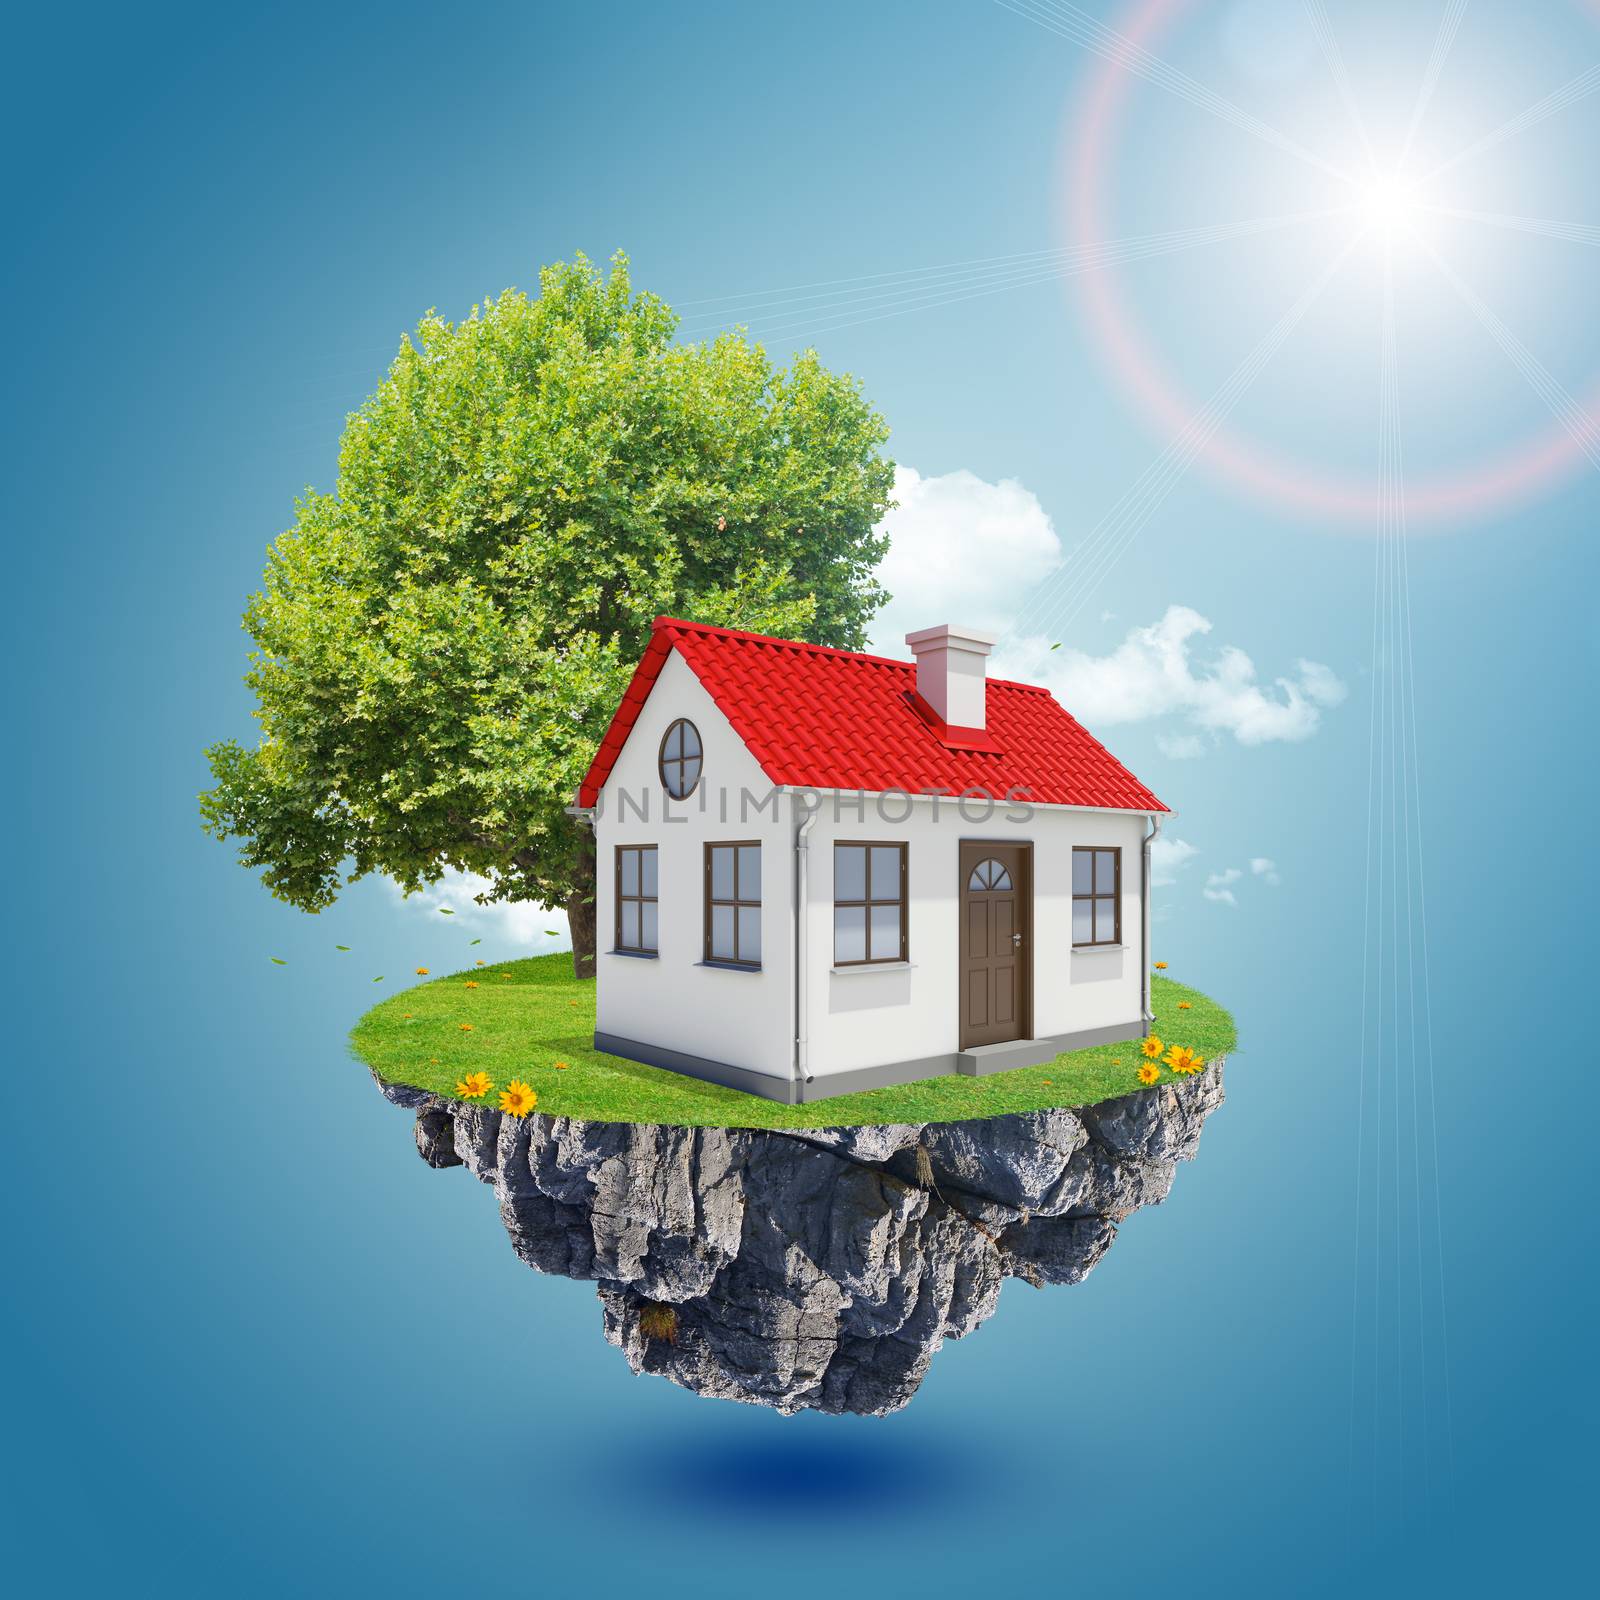 House on island with tree on abstract blue background